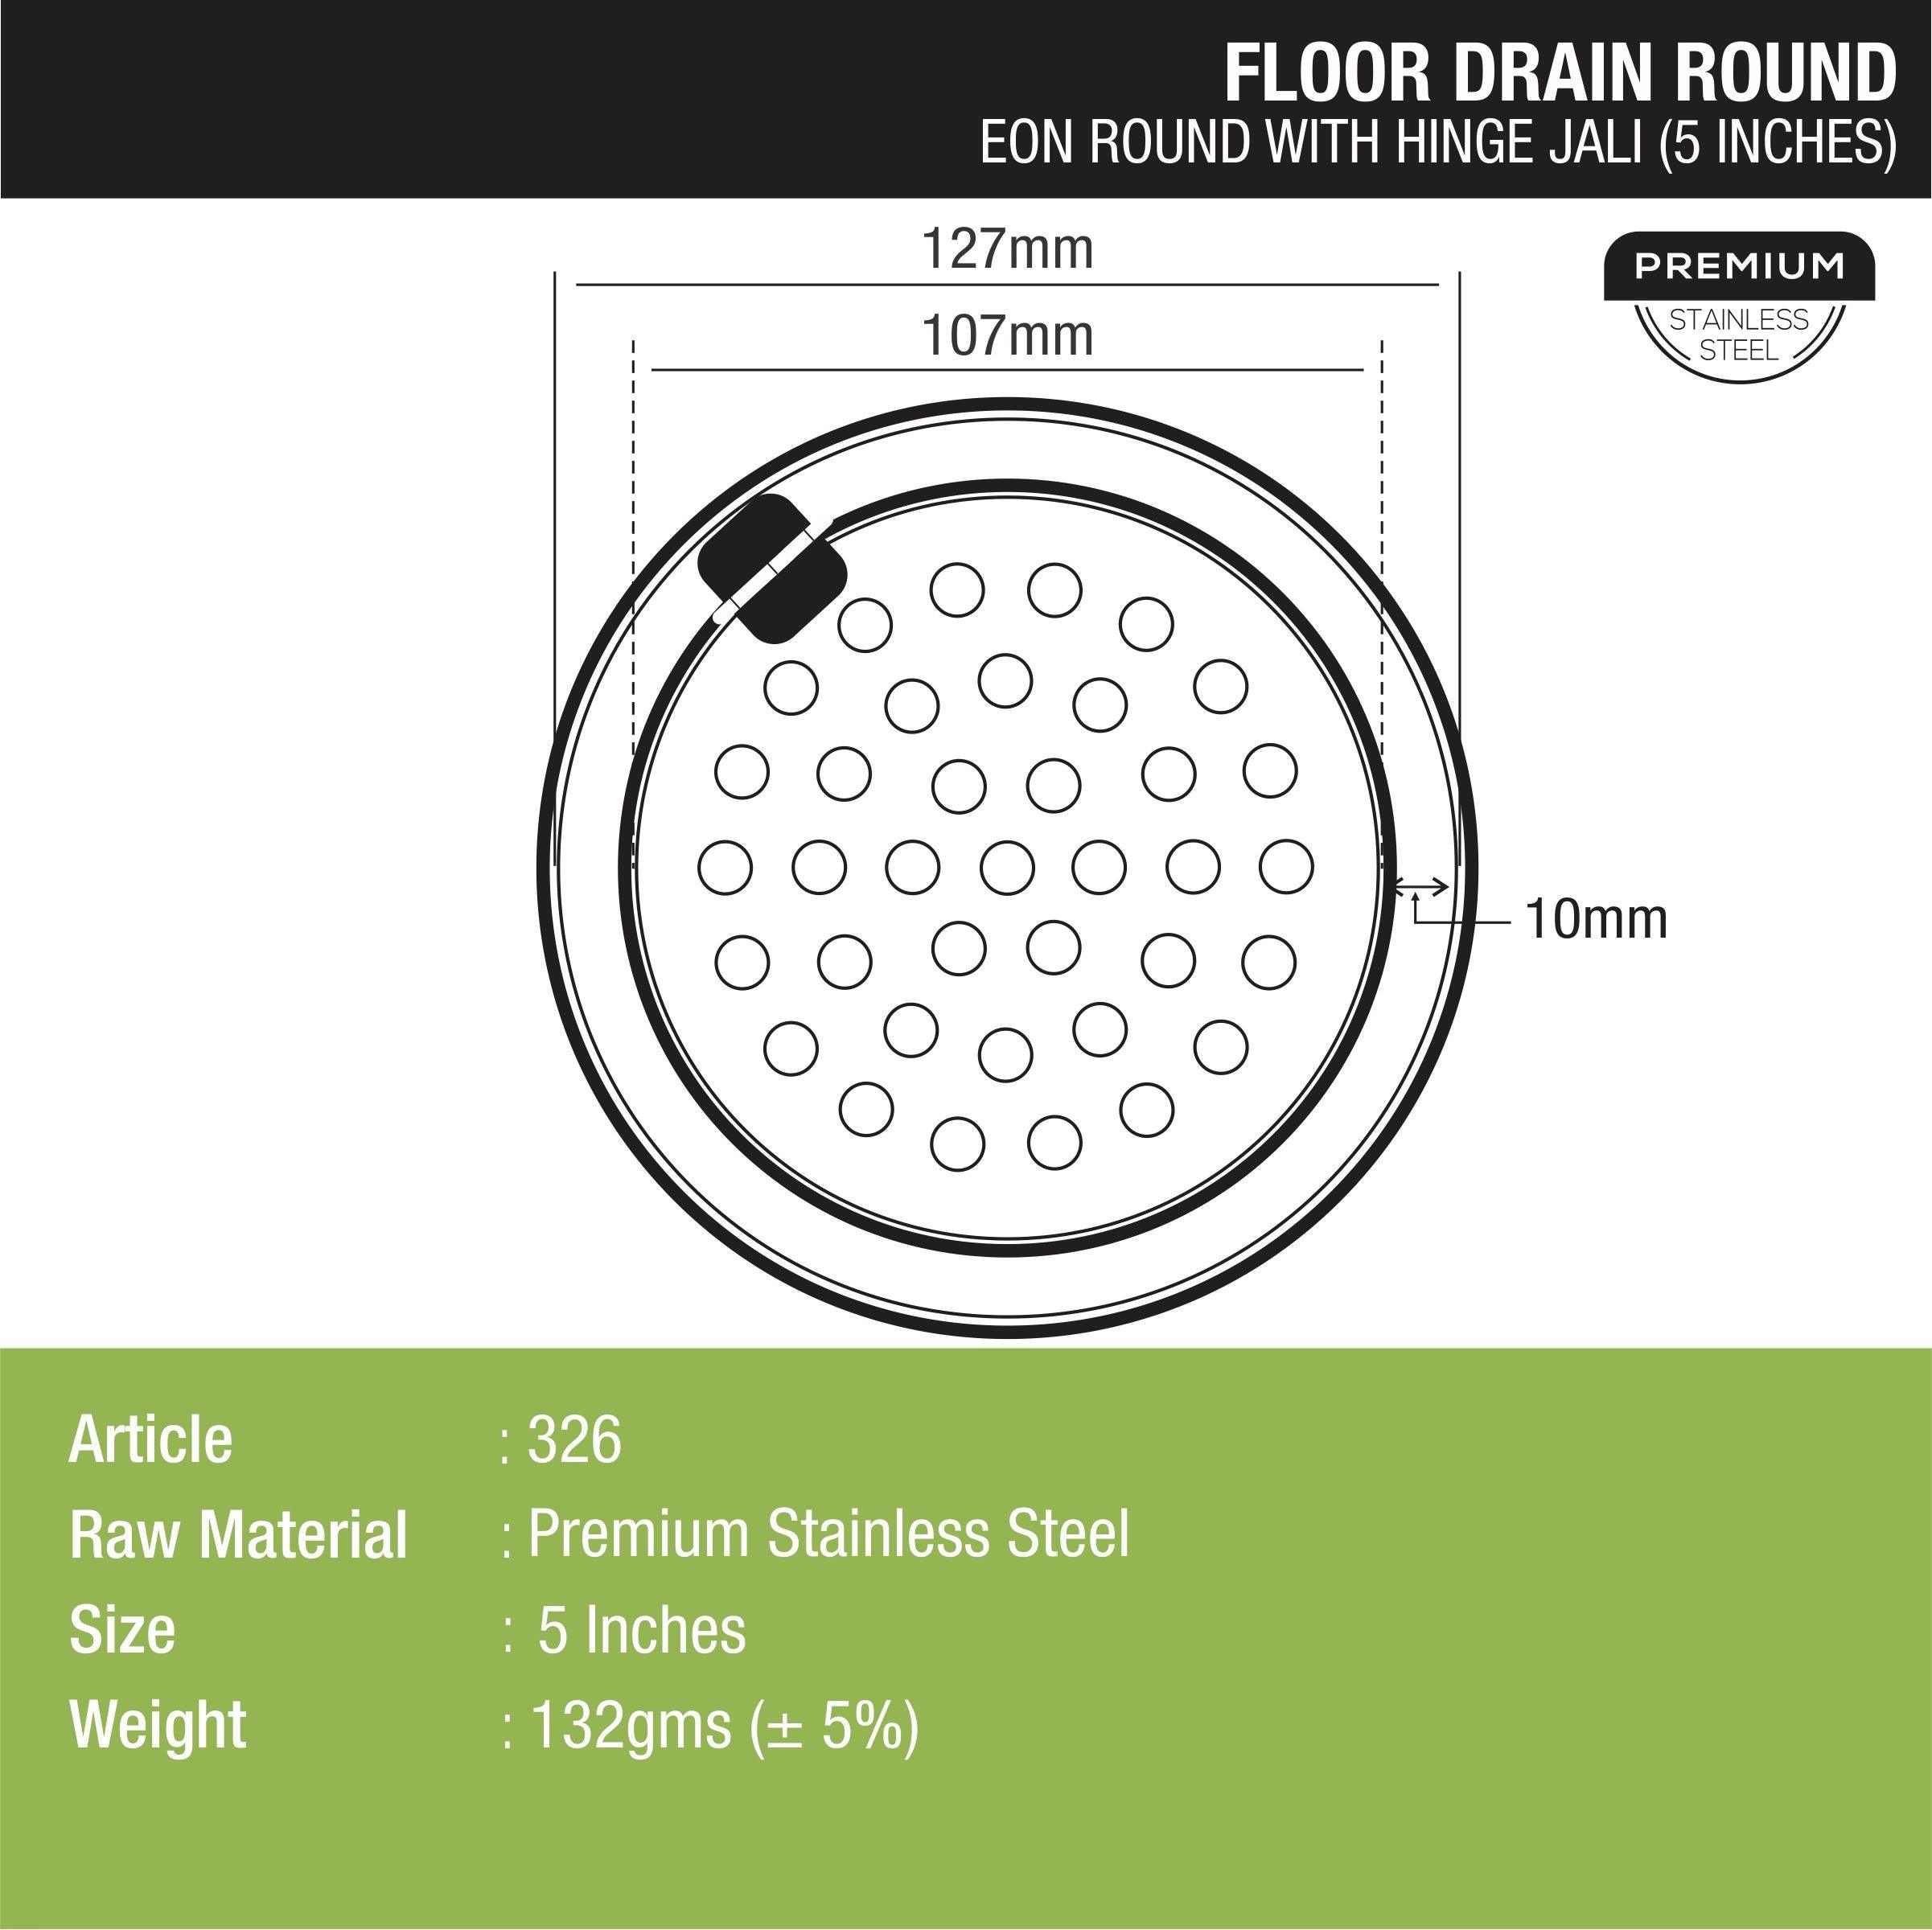 Eon Round Floor Drain with Hinge (5 inches) dimensions and sizes